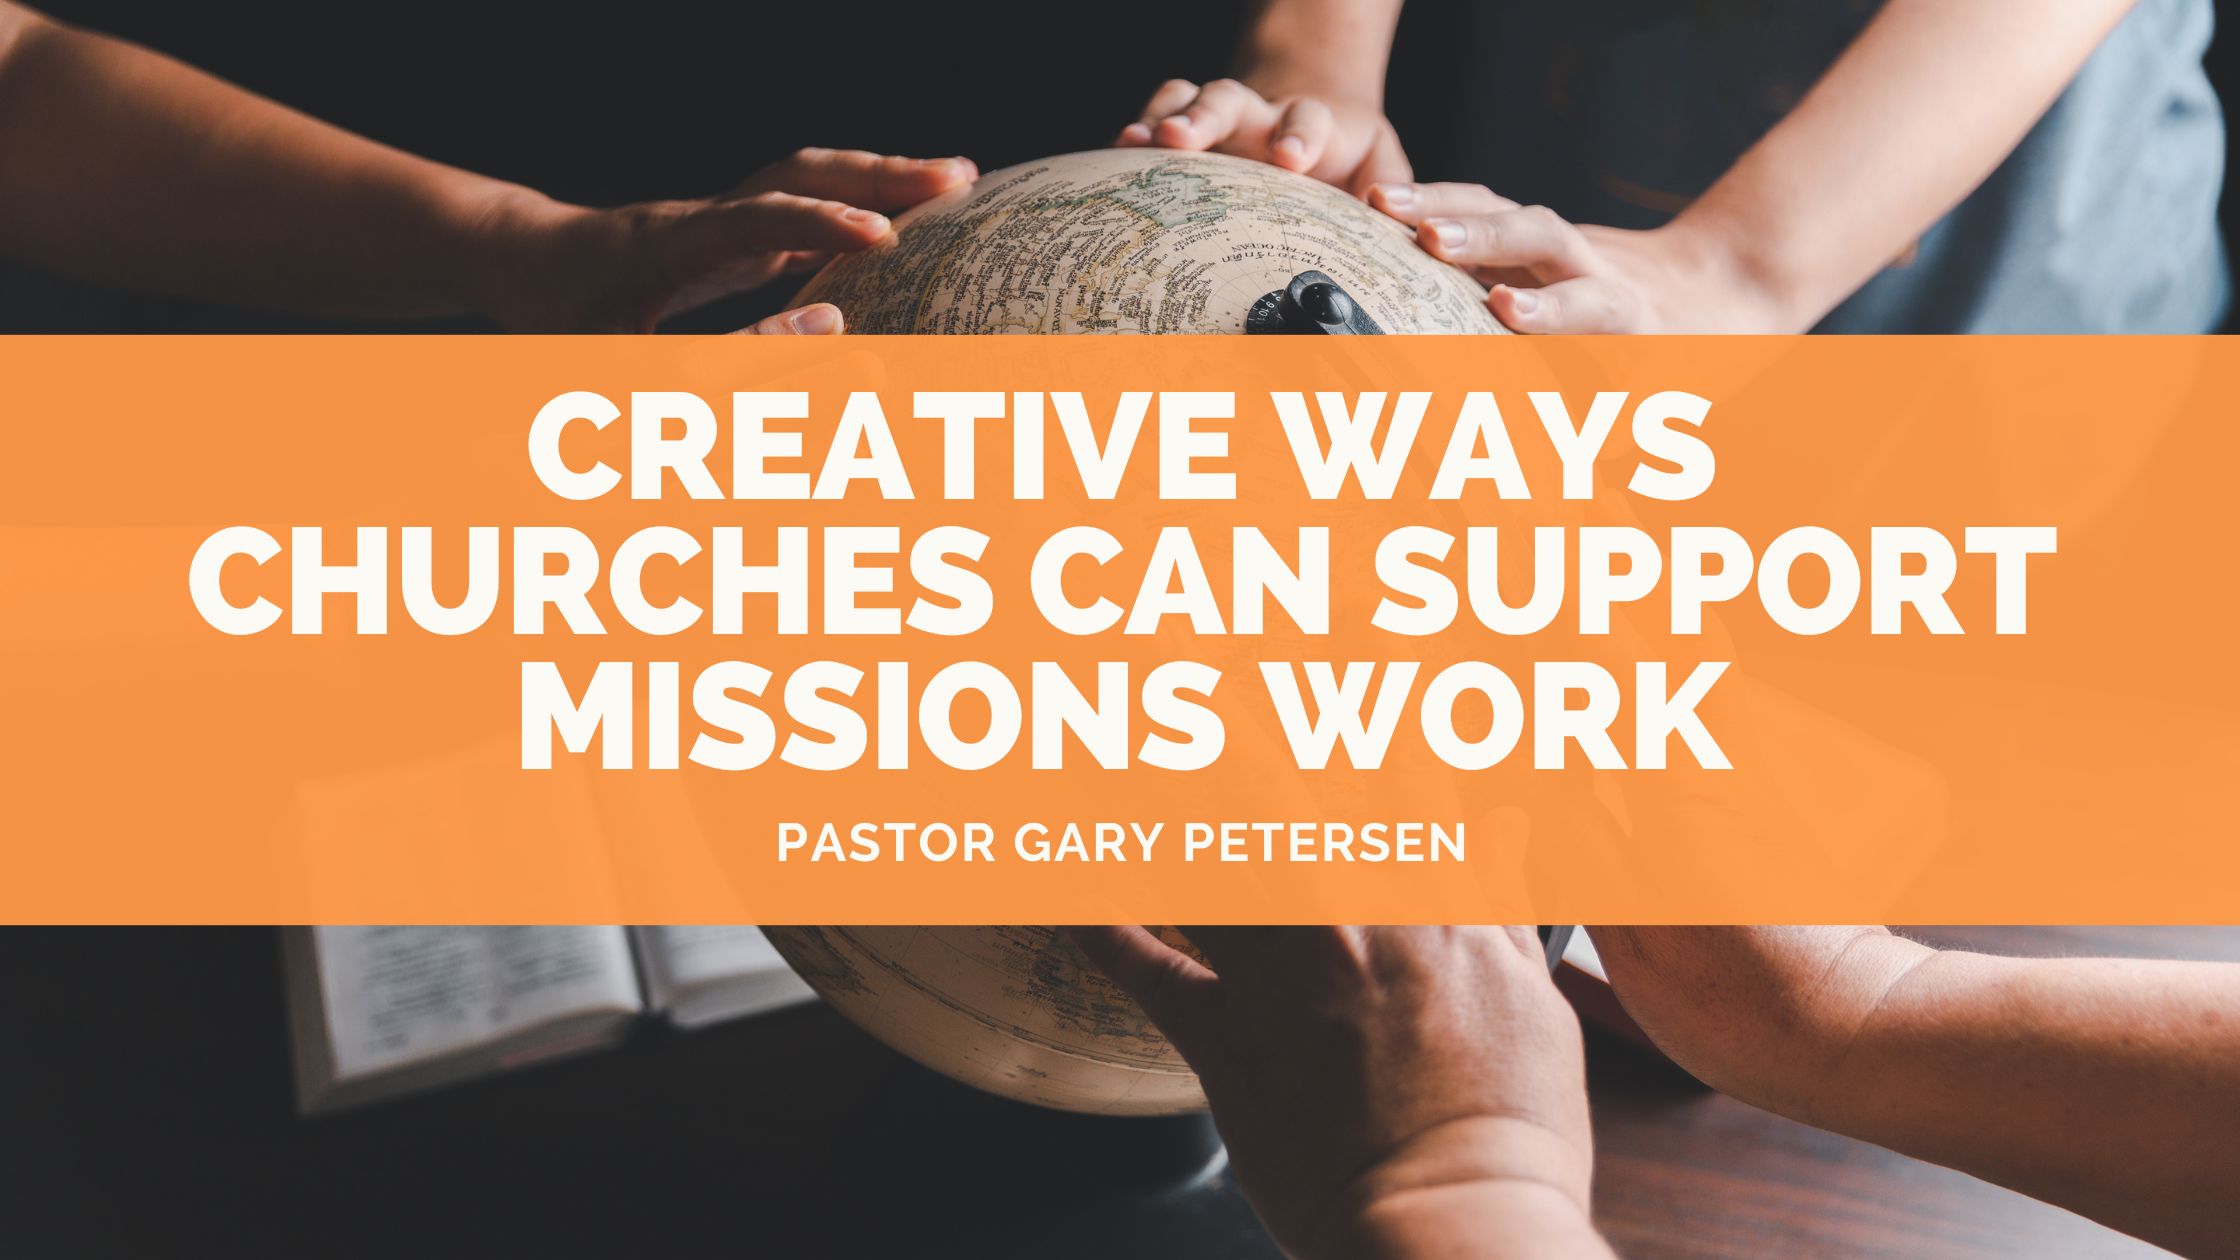 Creative Ways Churches Can Support Missions Work